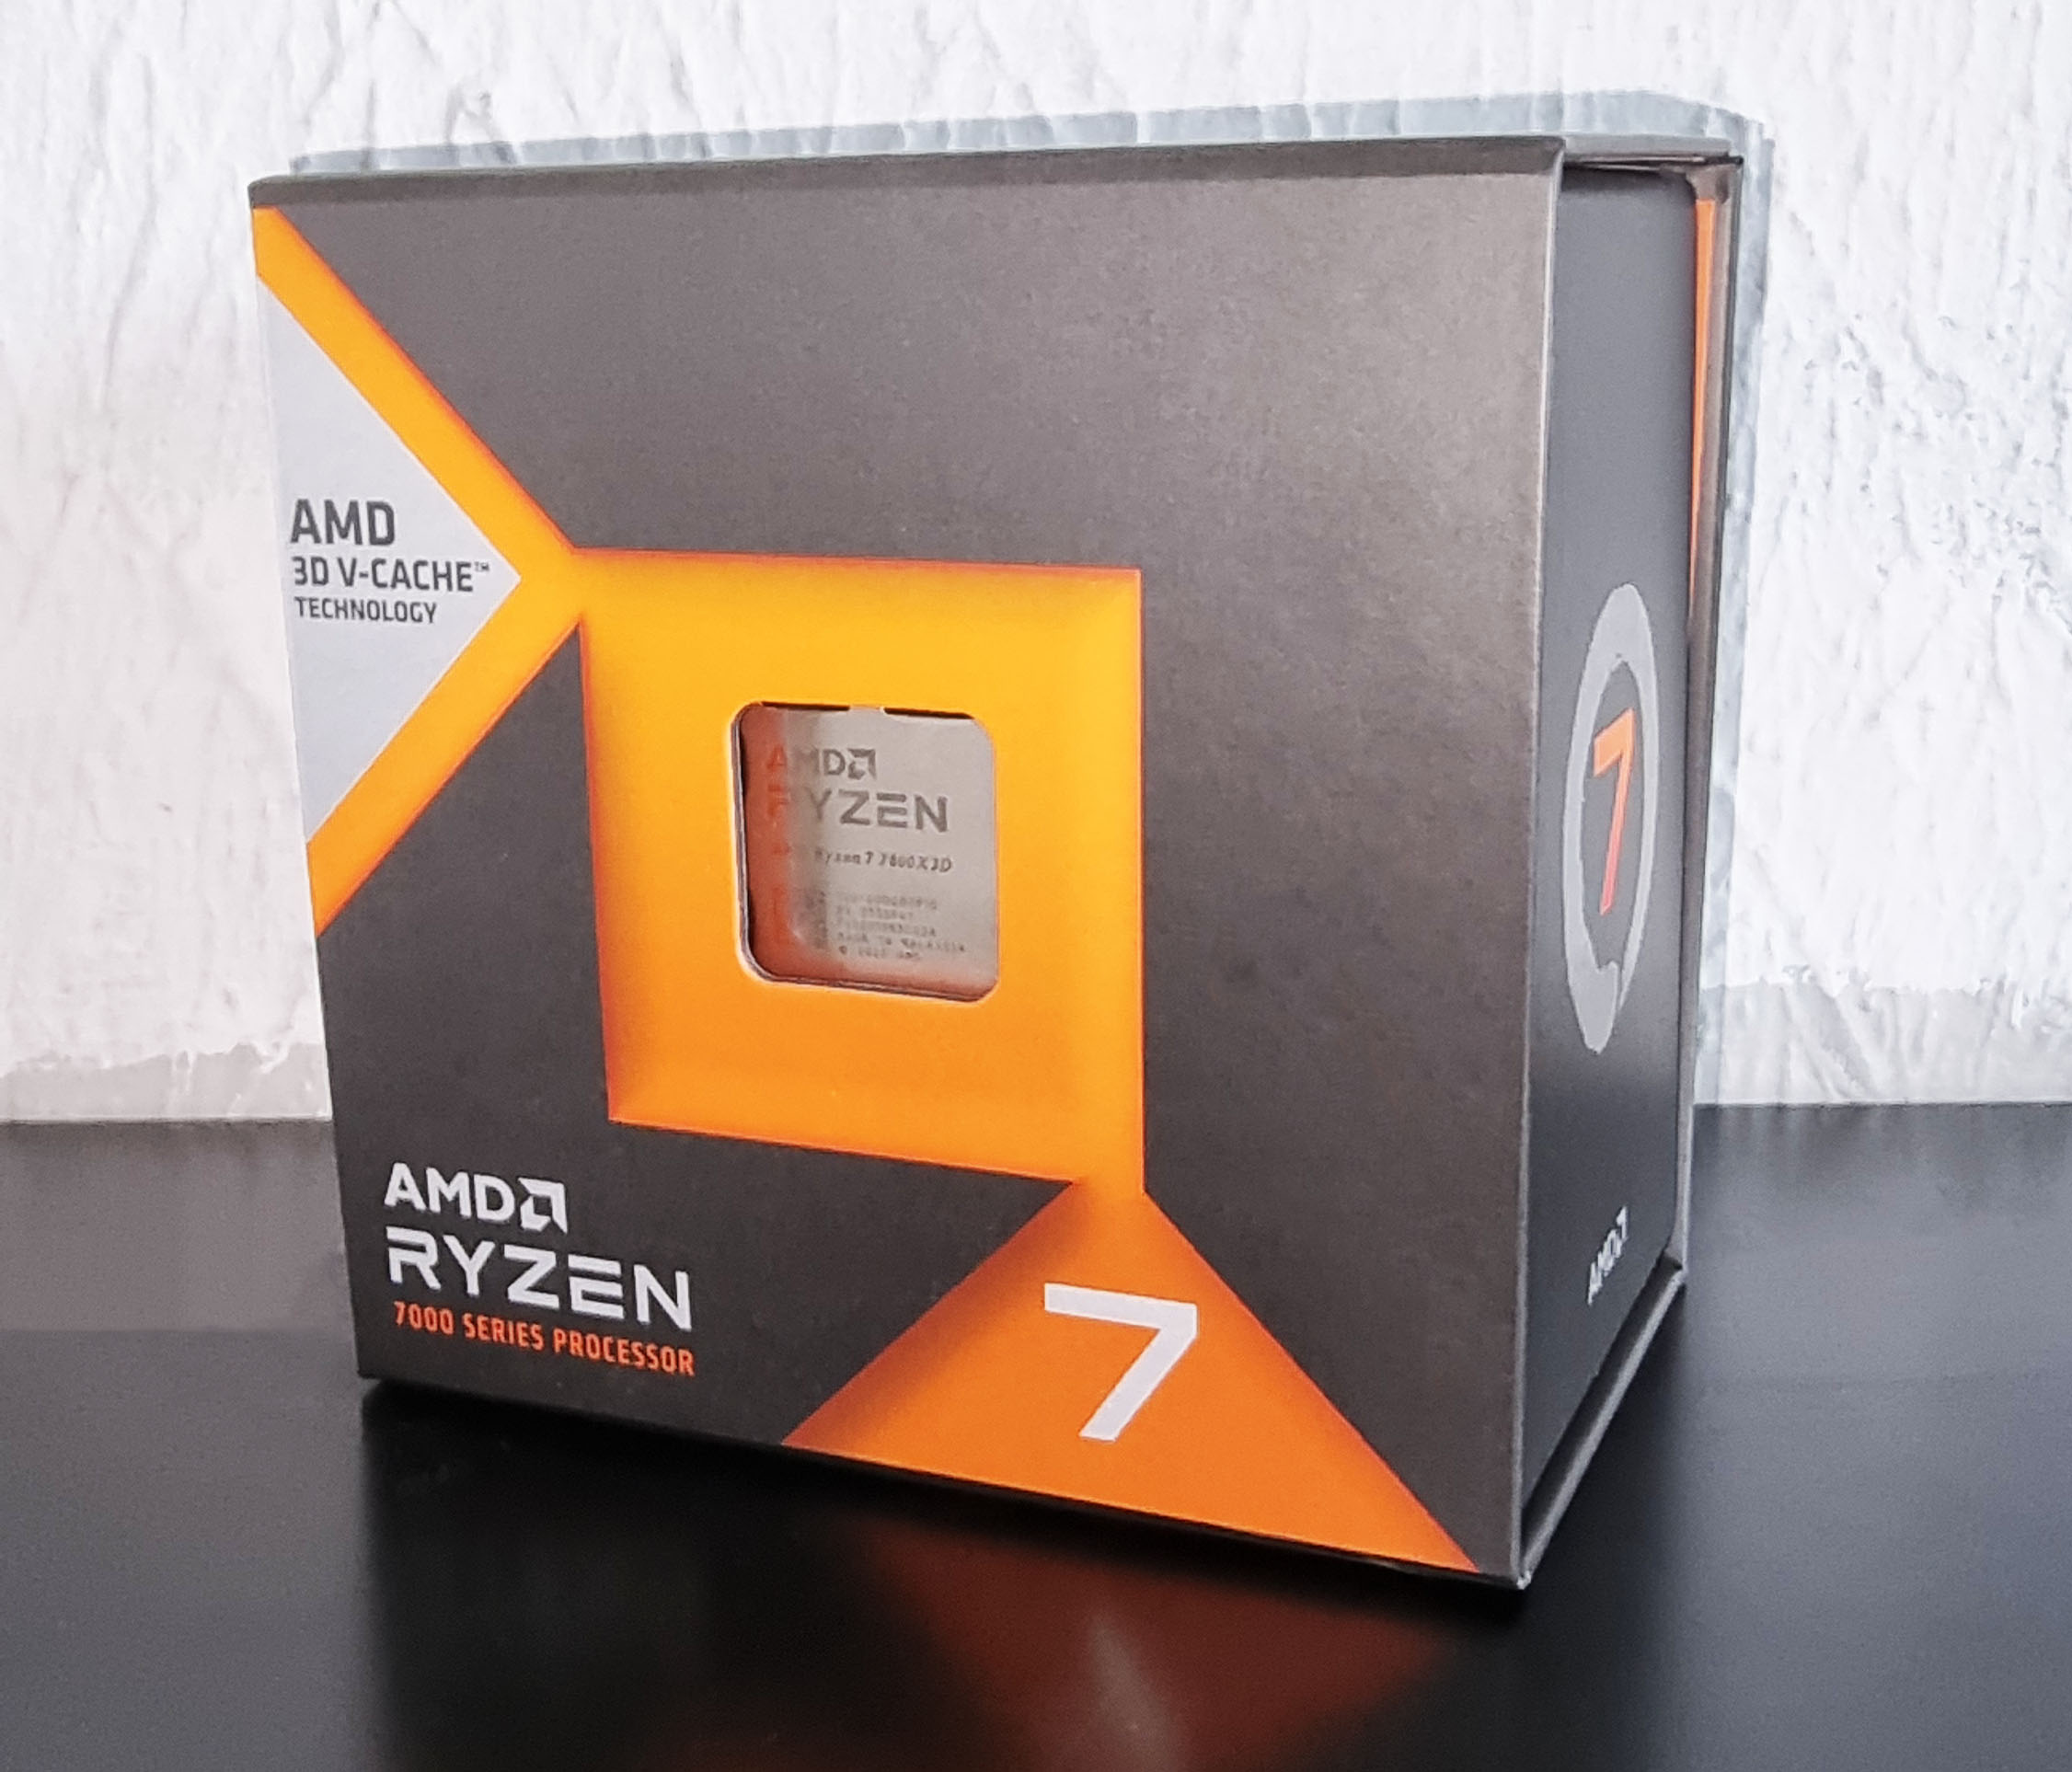 AMD Ryzen 7 7800X3D Review - The Best Gaming CPU - Architecture